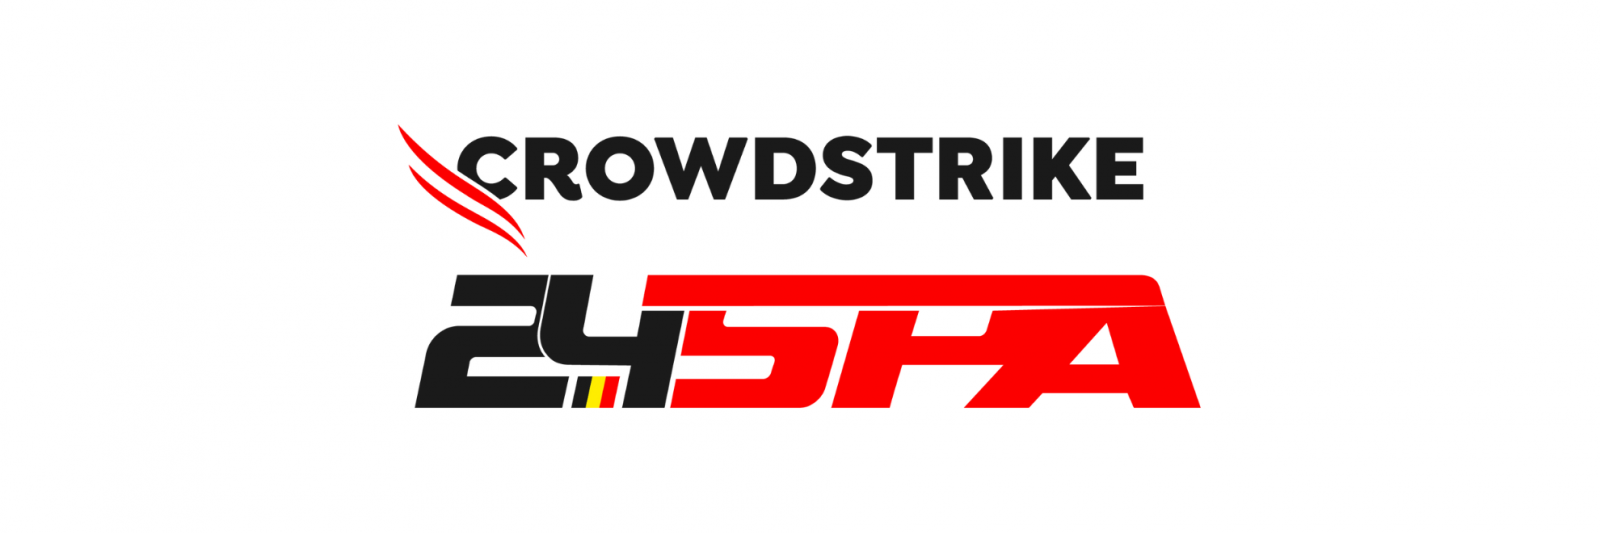 Fresh logo marks dawn of exciting new era for CrowdStrike 24 Hours of Spa